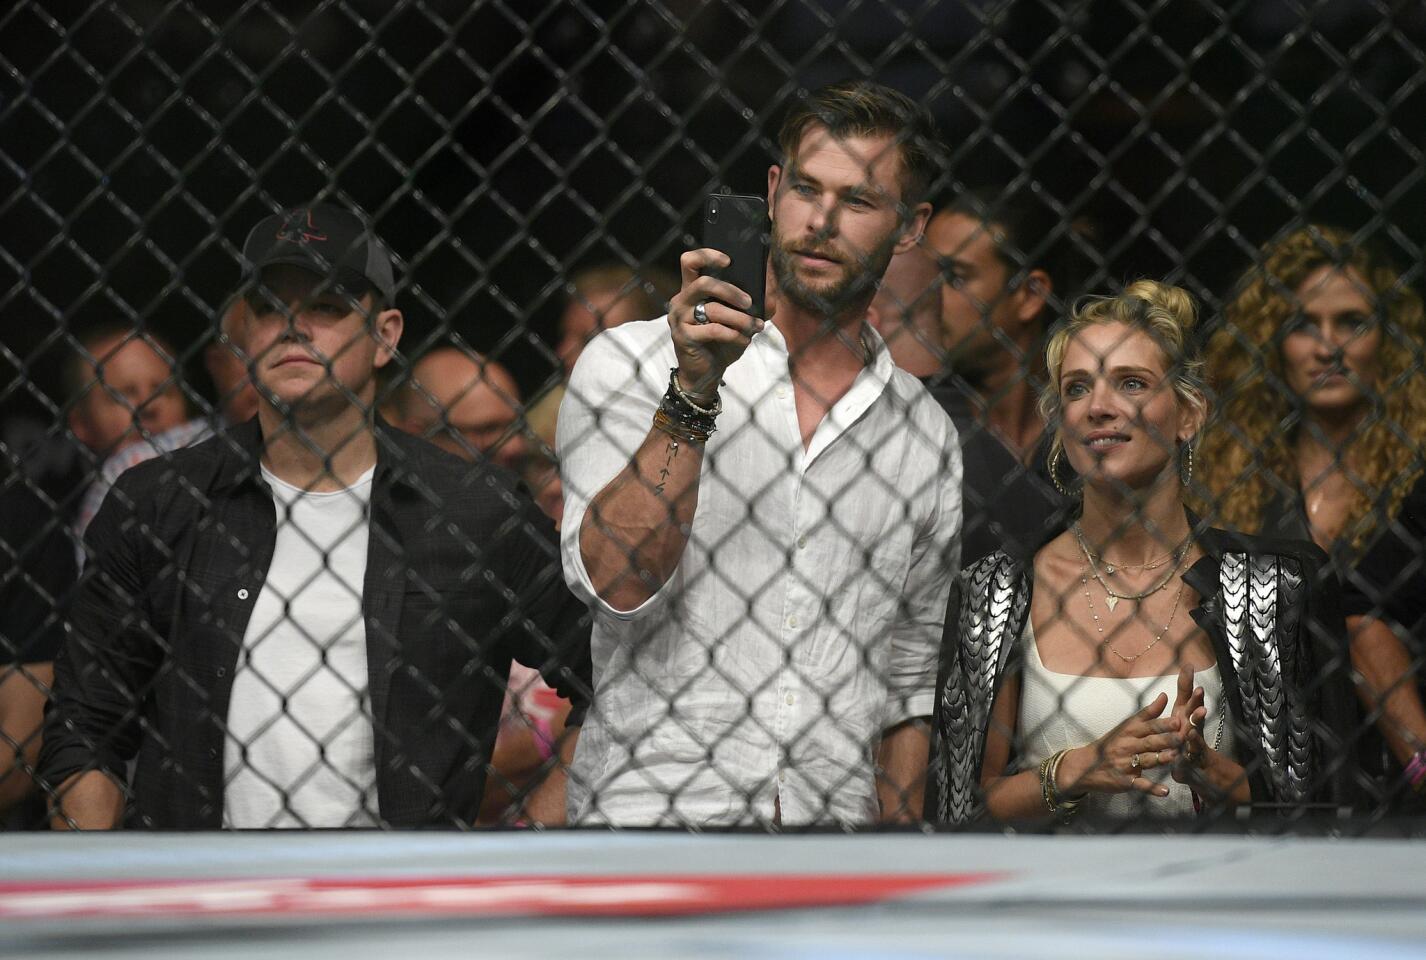 Actors, Matt Damon, left, Chris Hemsworth, center, and his wife Elsa Pataky watch Nigeria's Israel Adesanya and Brazil's Anderson Silva during their middleweight bout at the UFC 234 event in Melbourne, Australia, Sunday, Feb. 10, 2019. (AP Photo/Andy Brownbill)